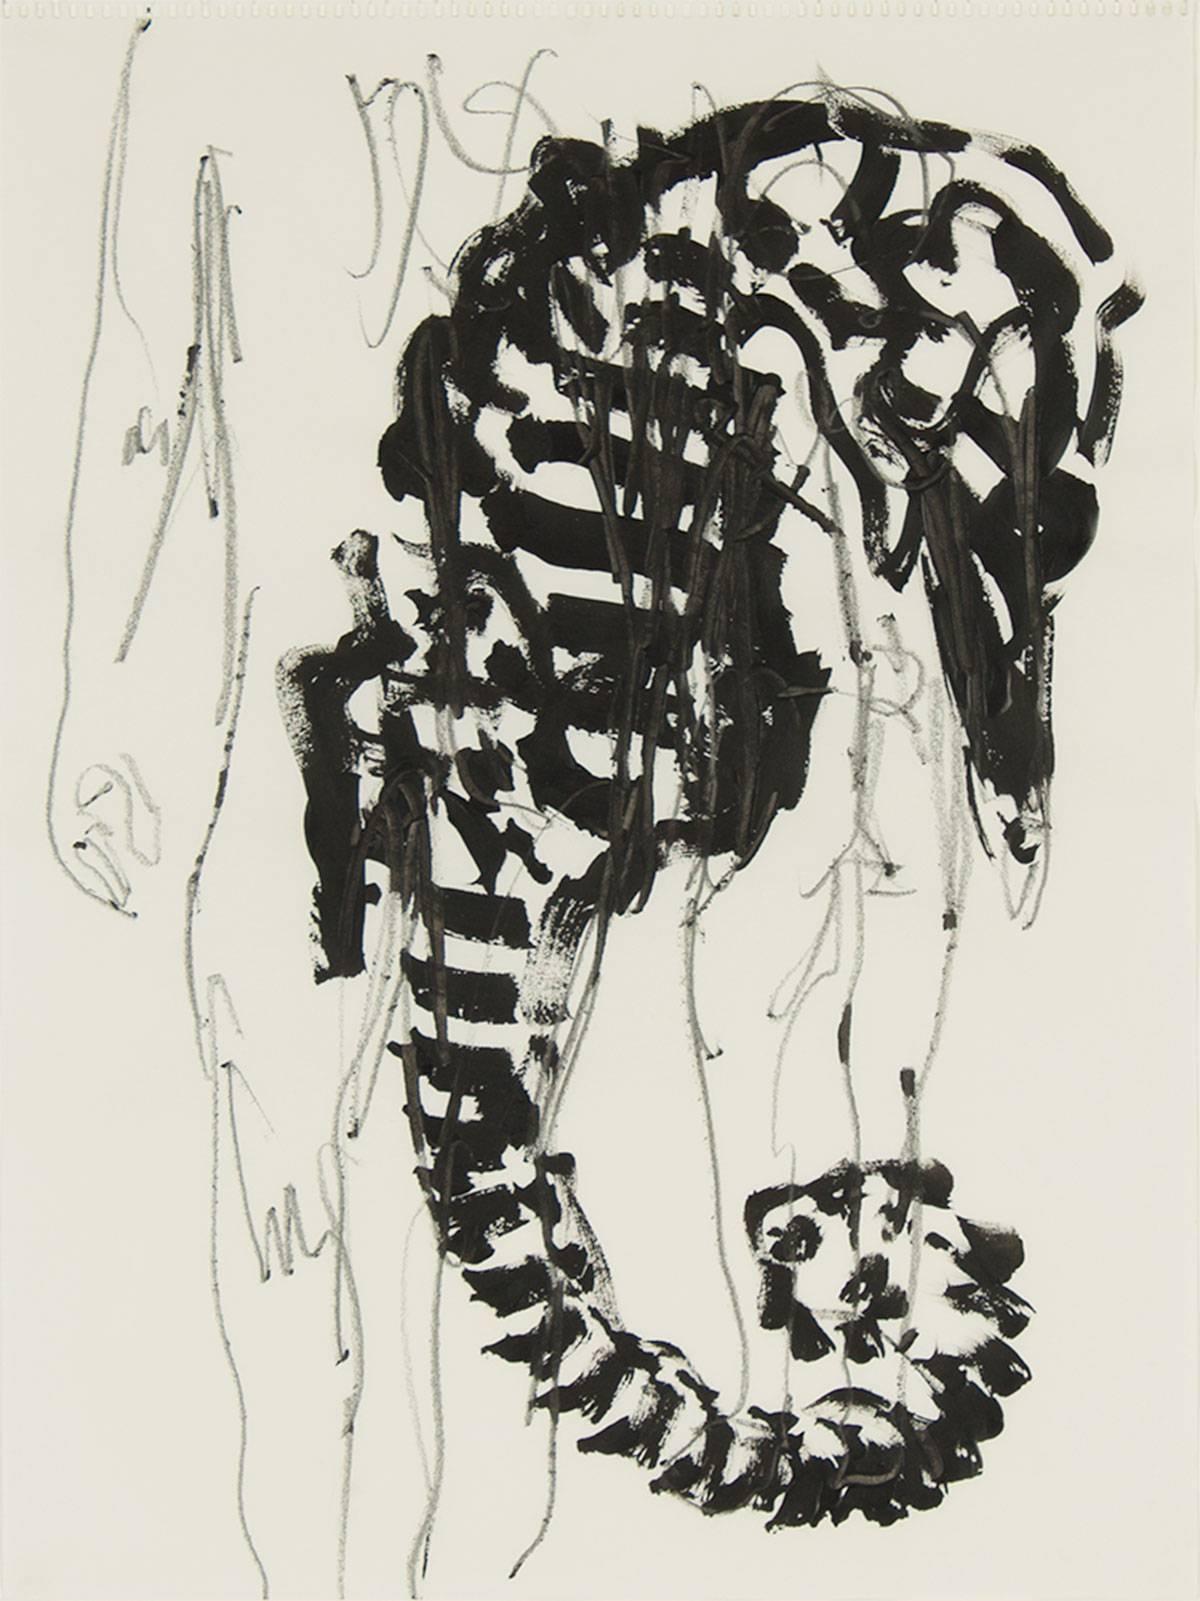 Nino Longobardi (b. 1953): Untitled, 1983 
Mixed media on paper. 19 x 14 in. (image), 26 x 21 in. (frame). 
Provenance: Cowles Gallery

Born in Naples in 1953, he is one of the leading figures of Italian painting in the last two decades. Nino